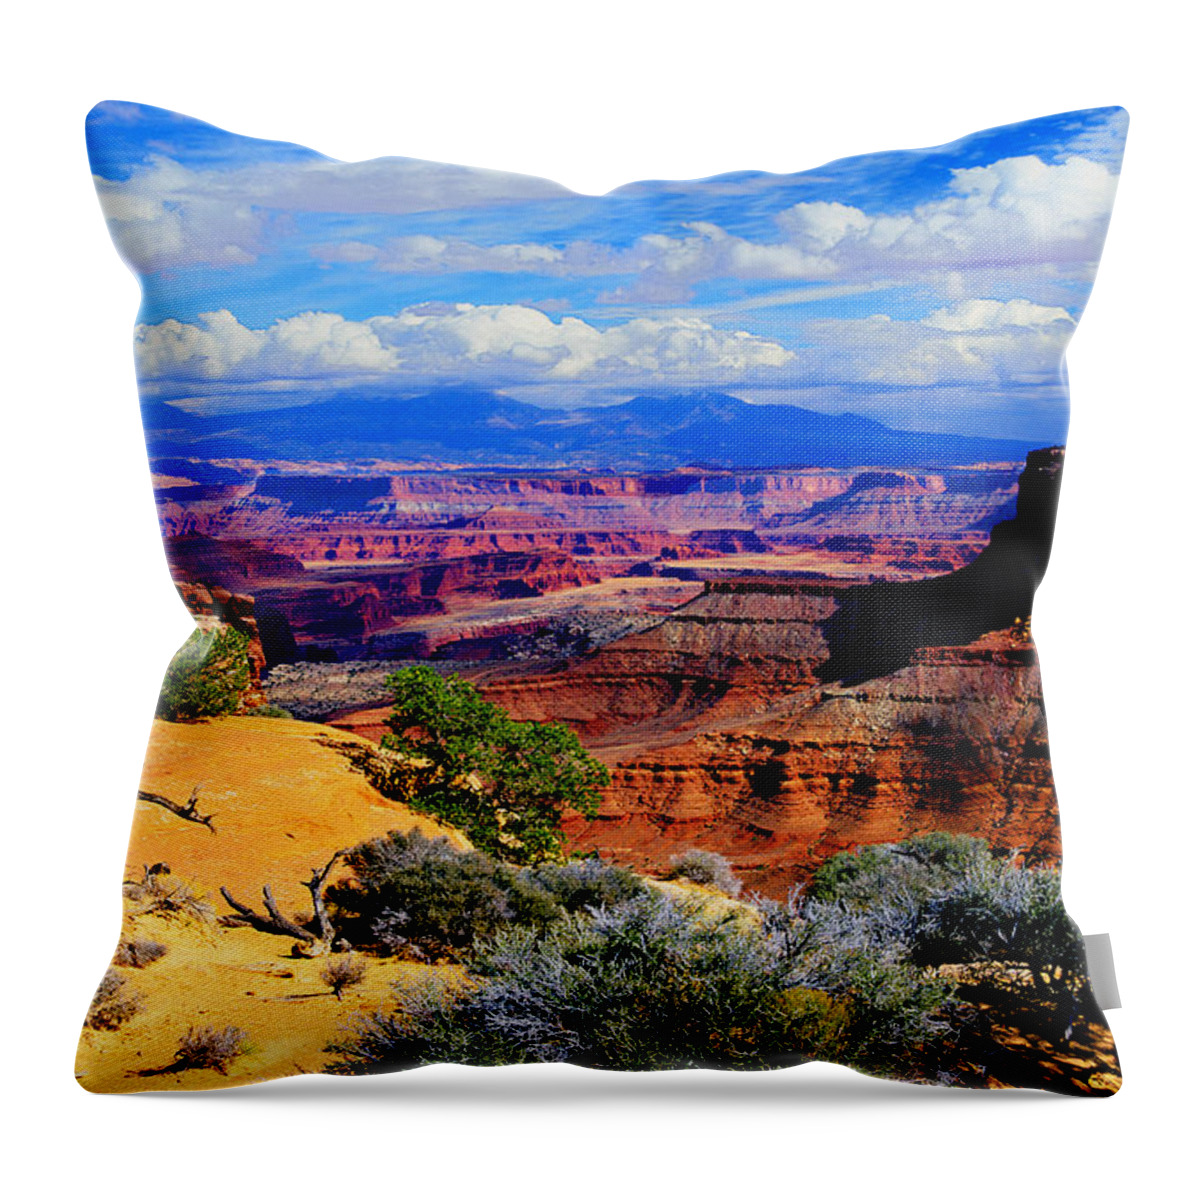 Western Landscape Throw Pillow featuring the photograph Canyonlands by Frank Houck